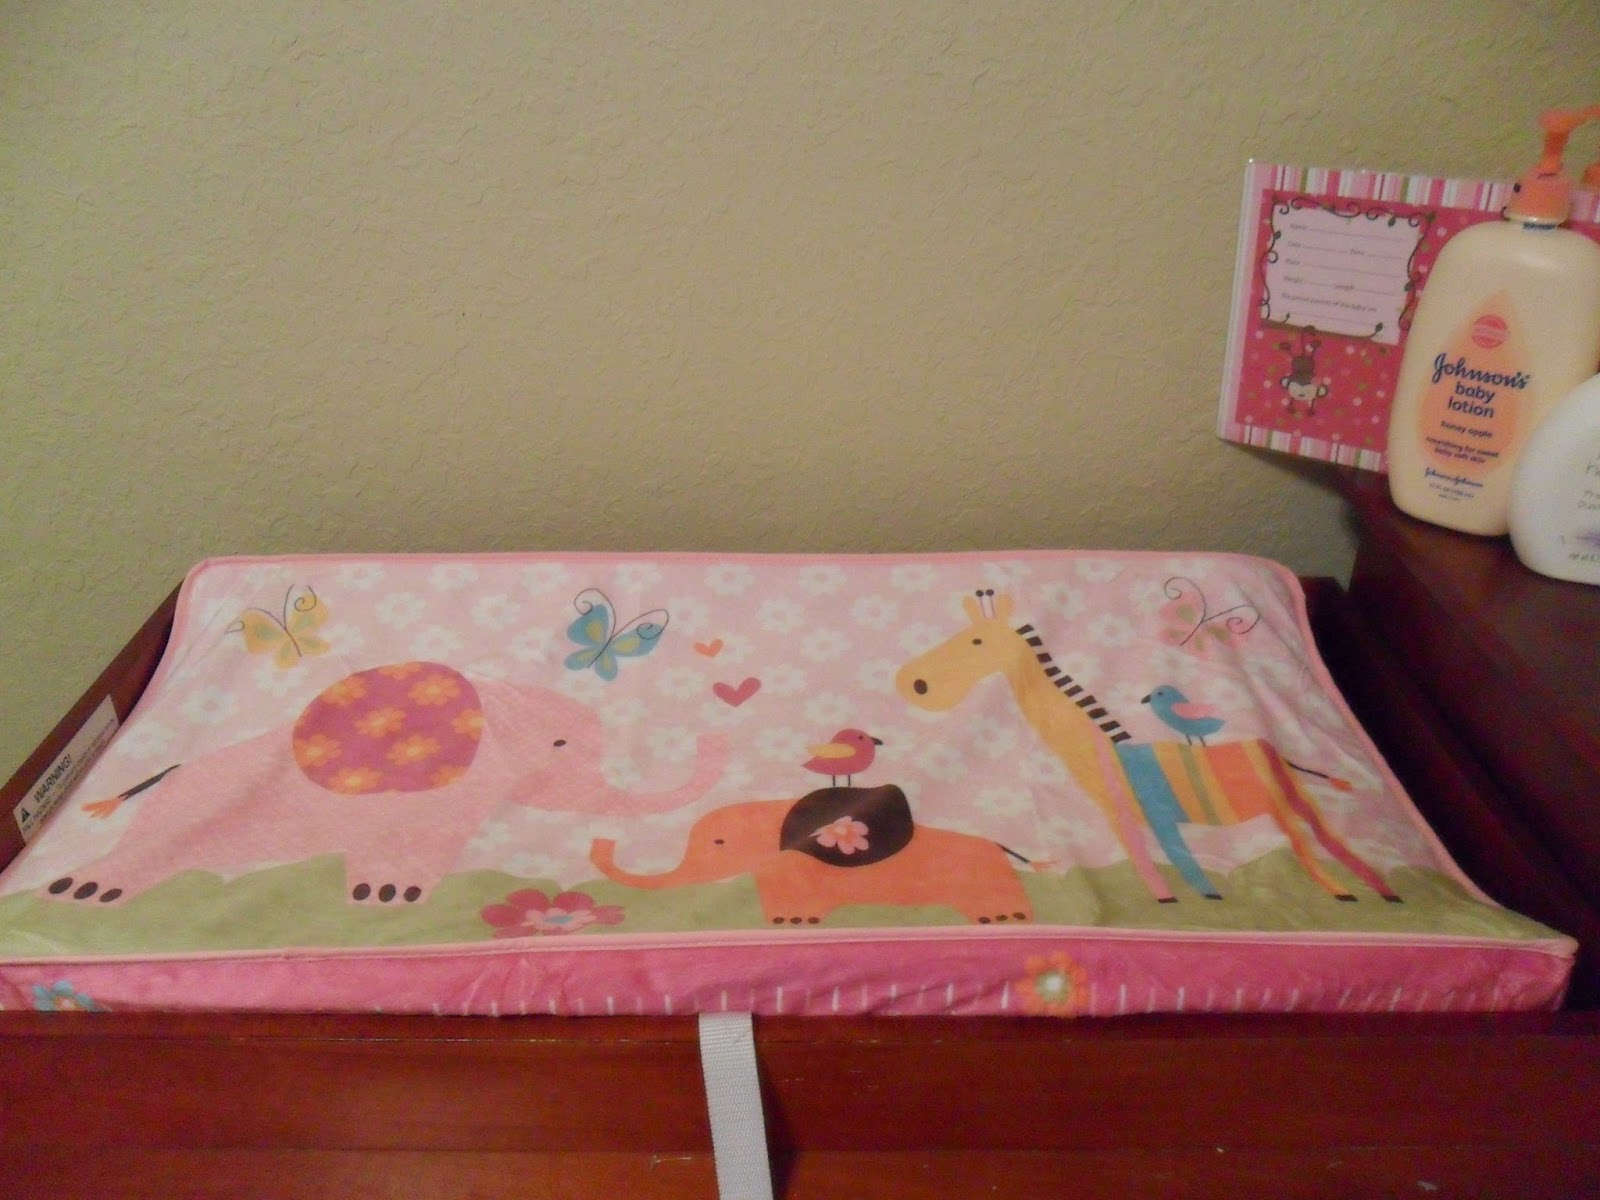 Baby' Journey Measure me changing pad cover. Review (Blu me away or Pink of me Event)